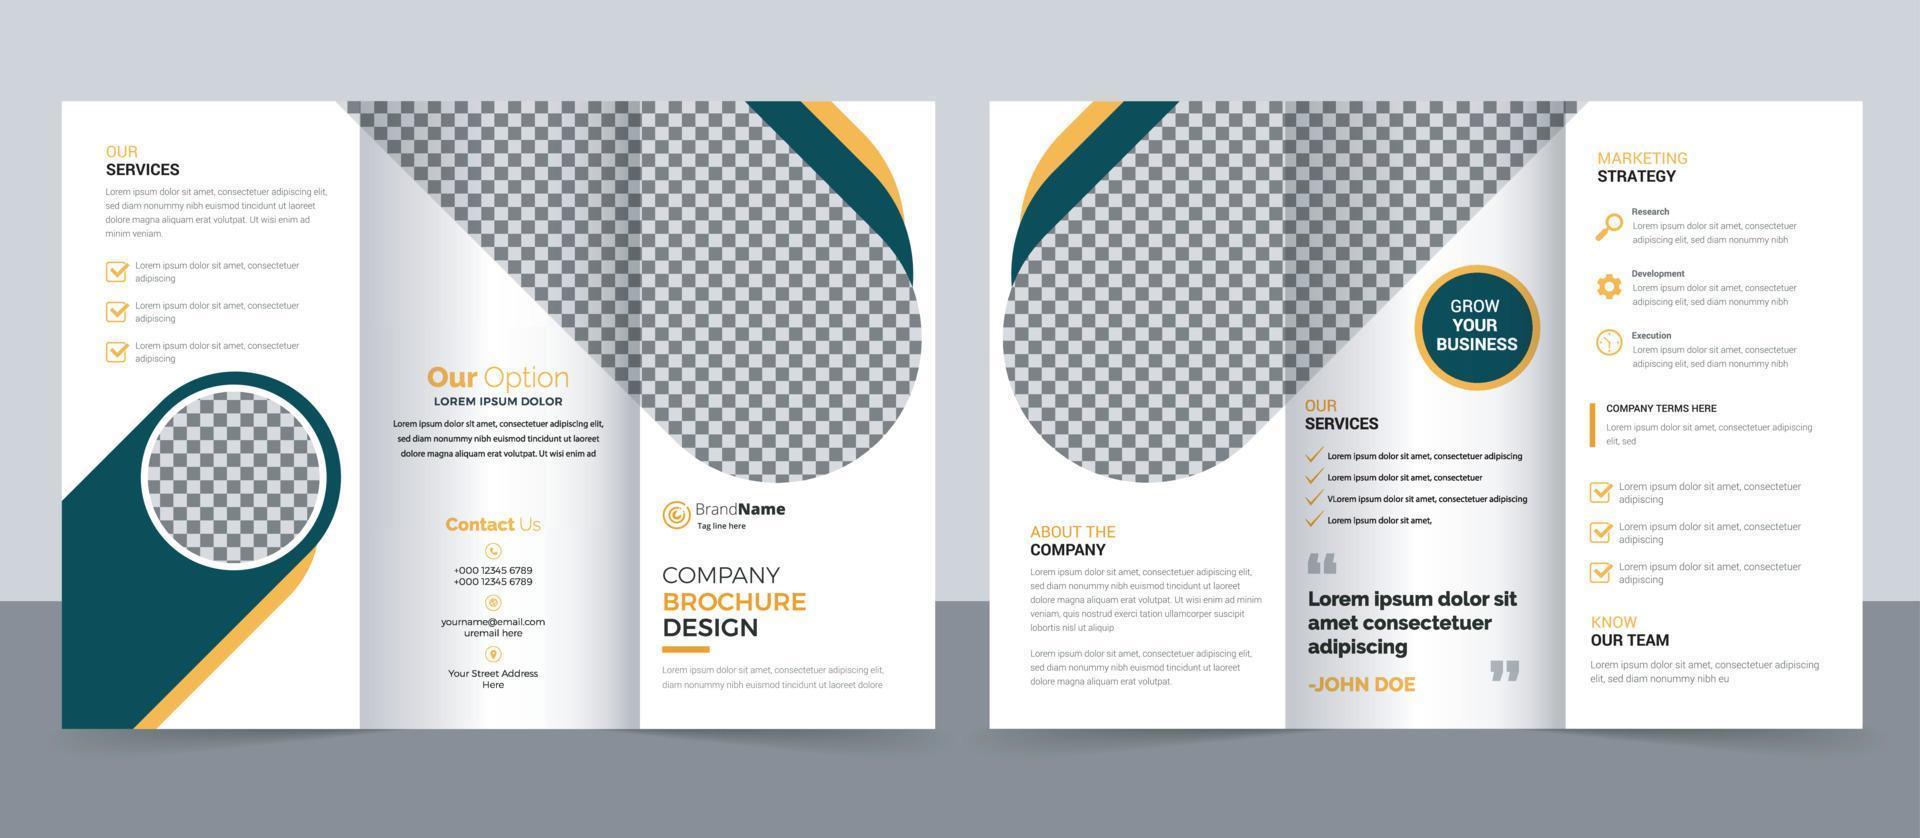 Business Brochure Template in Tri Fold Layout. Corporate Design Leaflet with Replicable Image. vector